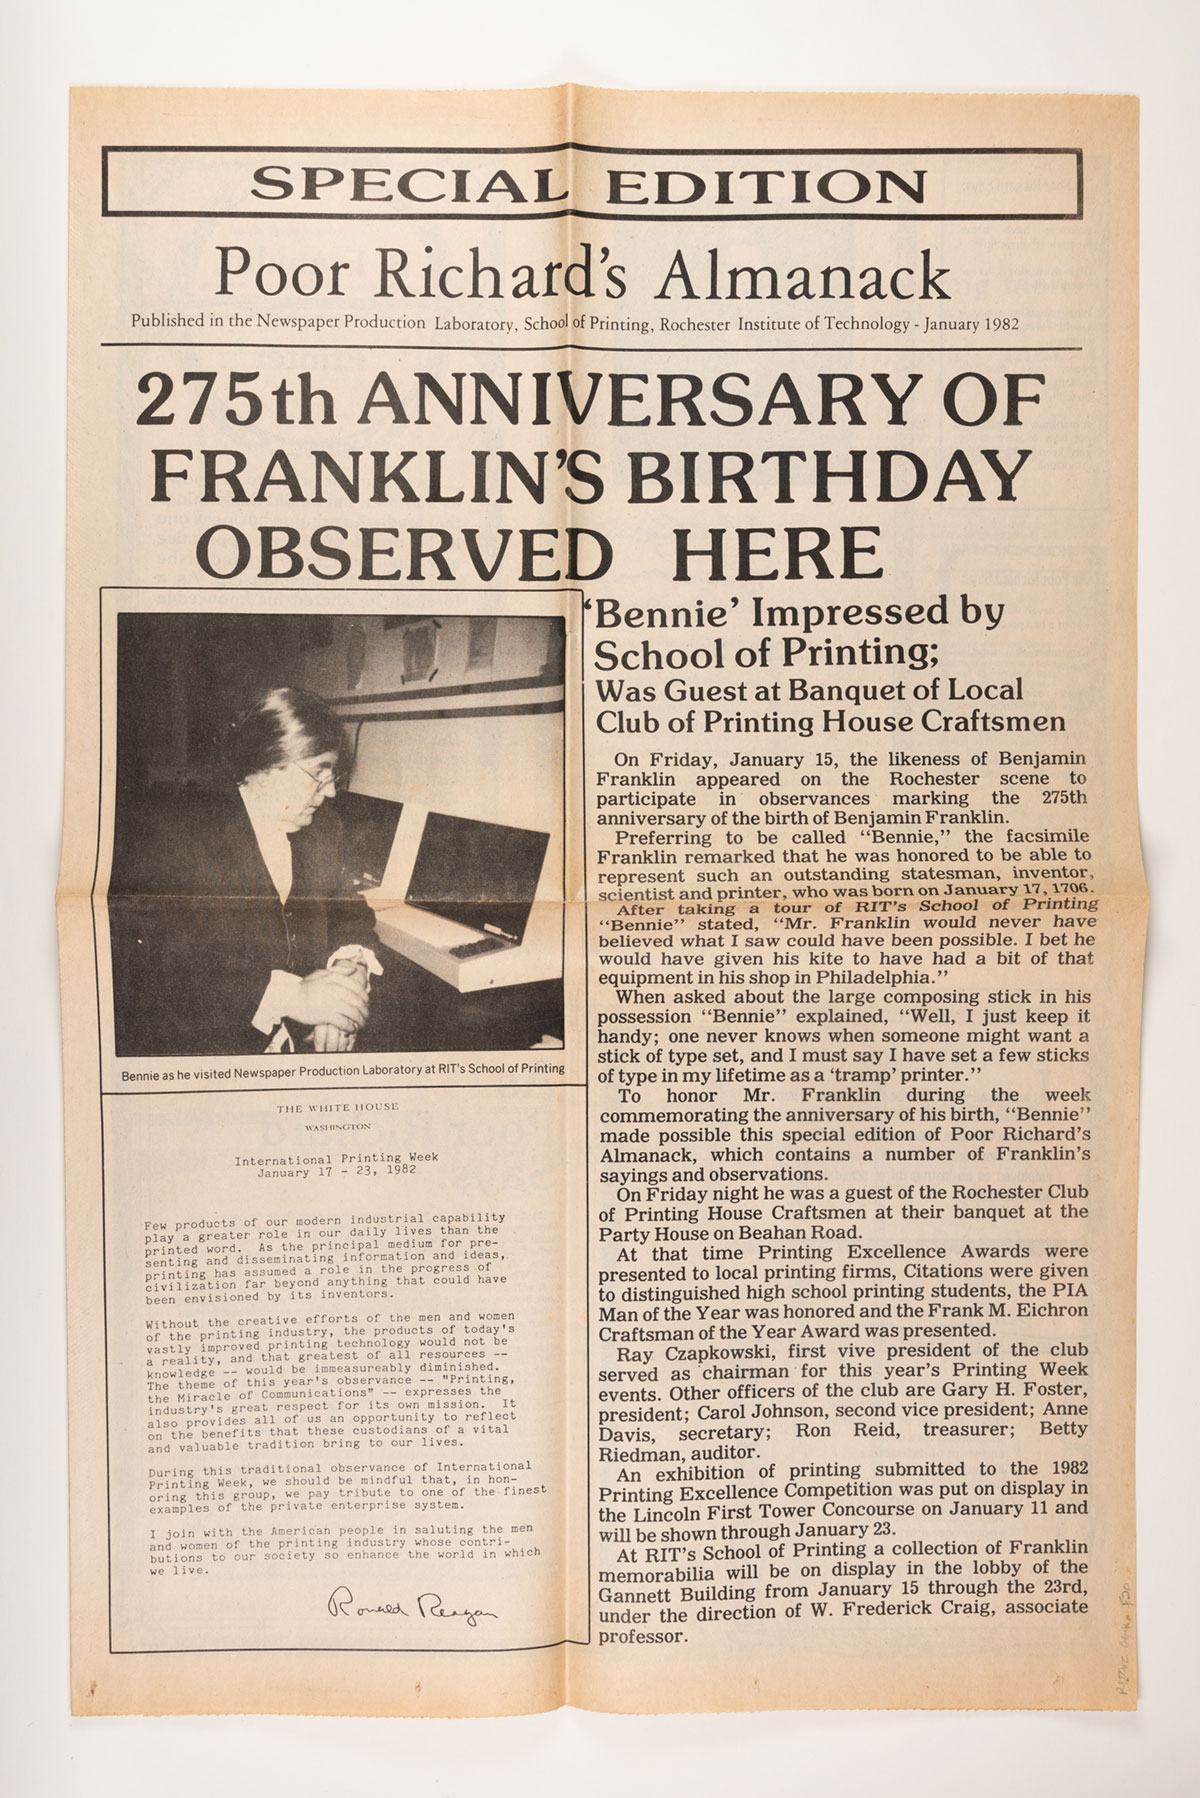 news paper article with the title "275th Anniversary of Franklin's Birthday Observed Here"